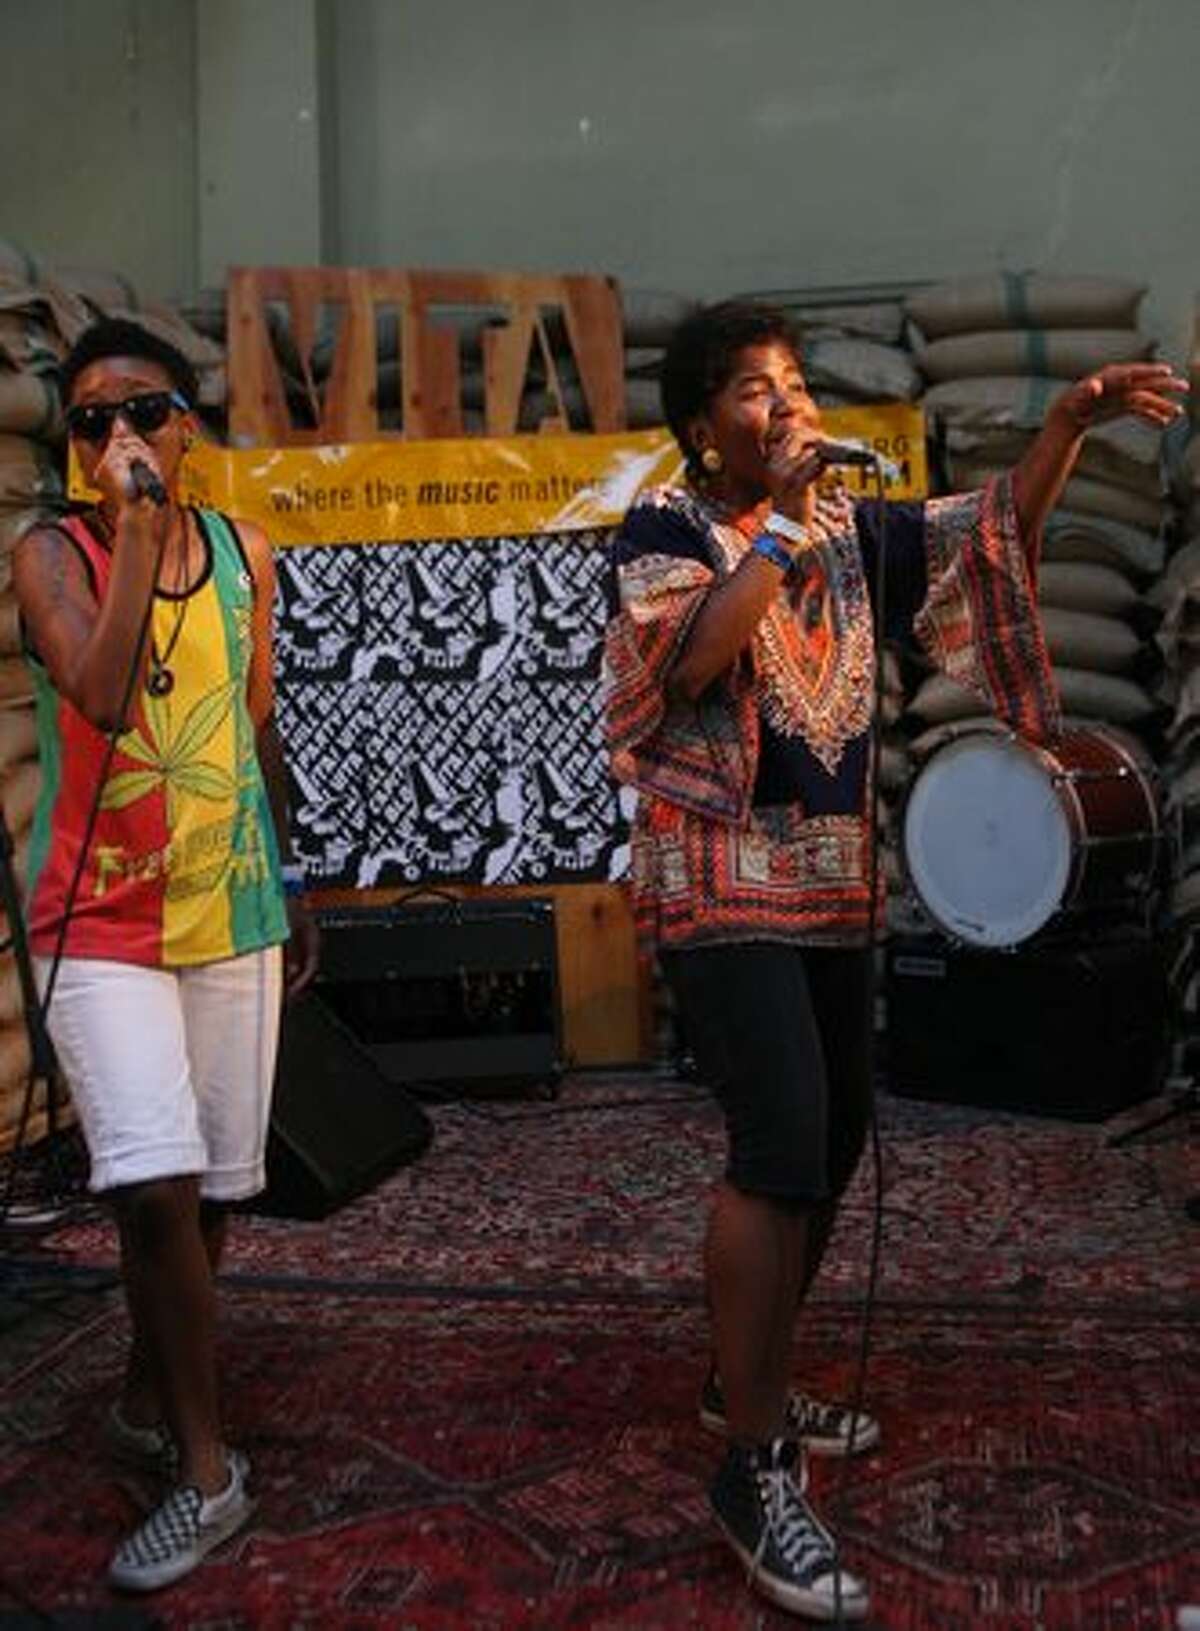 THEESatisfaction perfroms in the bean room at Cafe Vita, during the Capitol Hill Block Party.